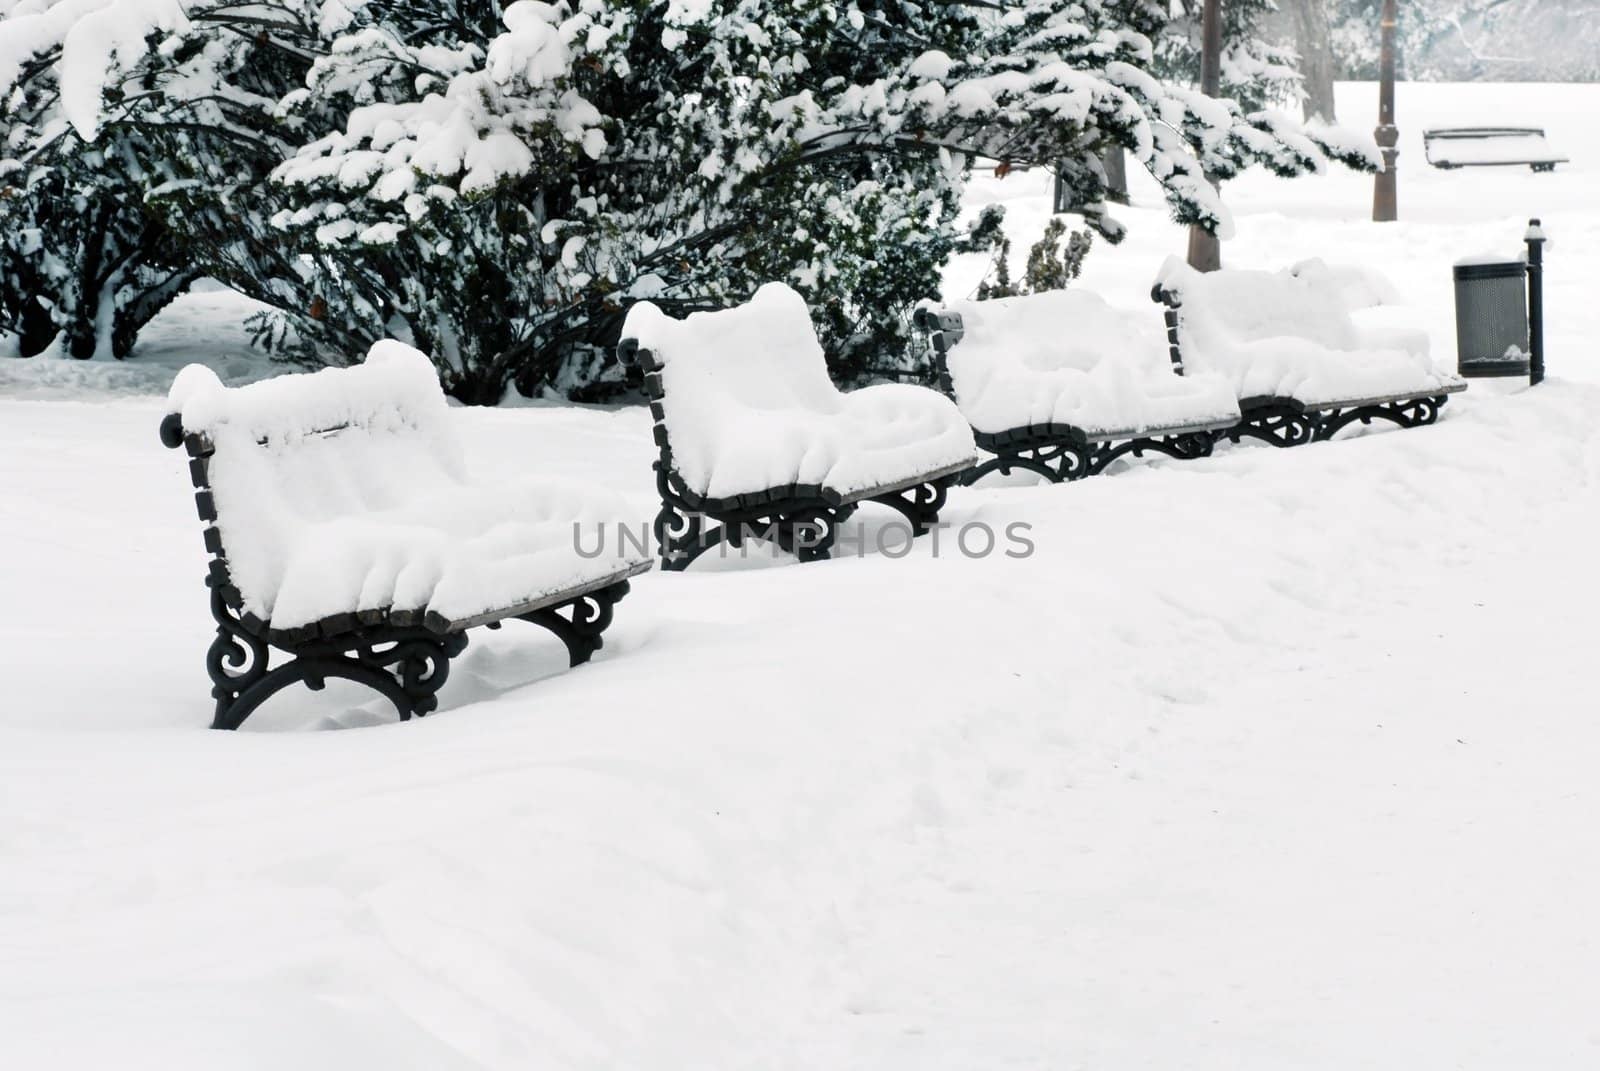 Bench at snow by simply